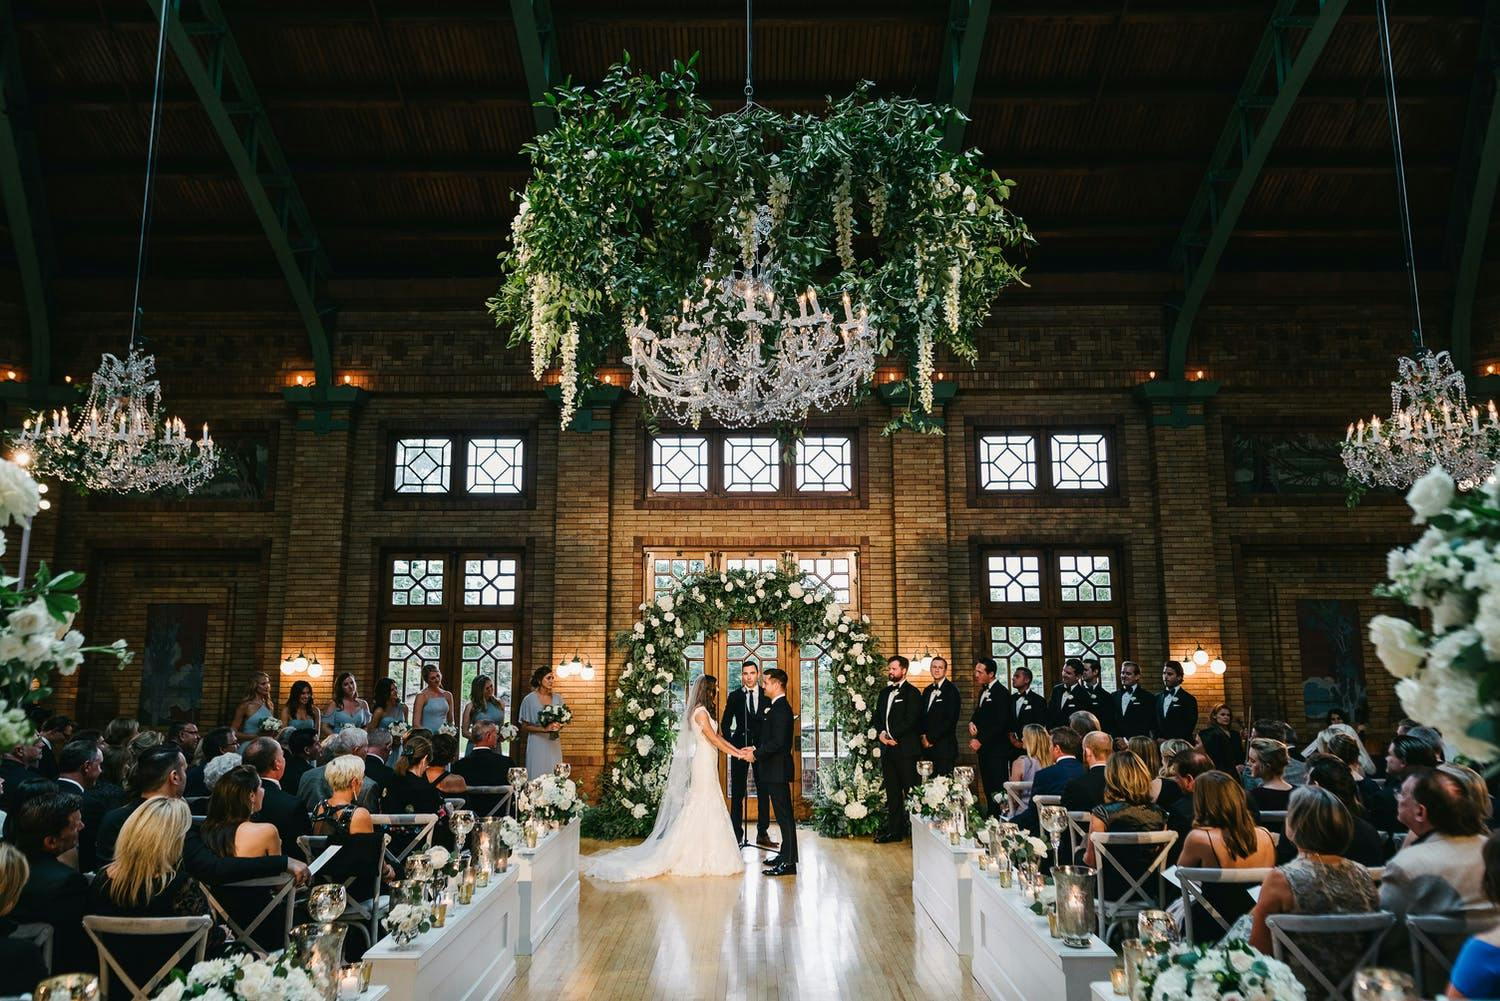 Wedding Ceremony at Cafe Brauer at Lincoln Park Zoo With Glittering Chandelier With Cascading Tendrils of Greenery | PartySlate